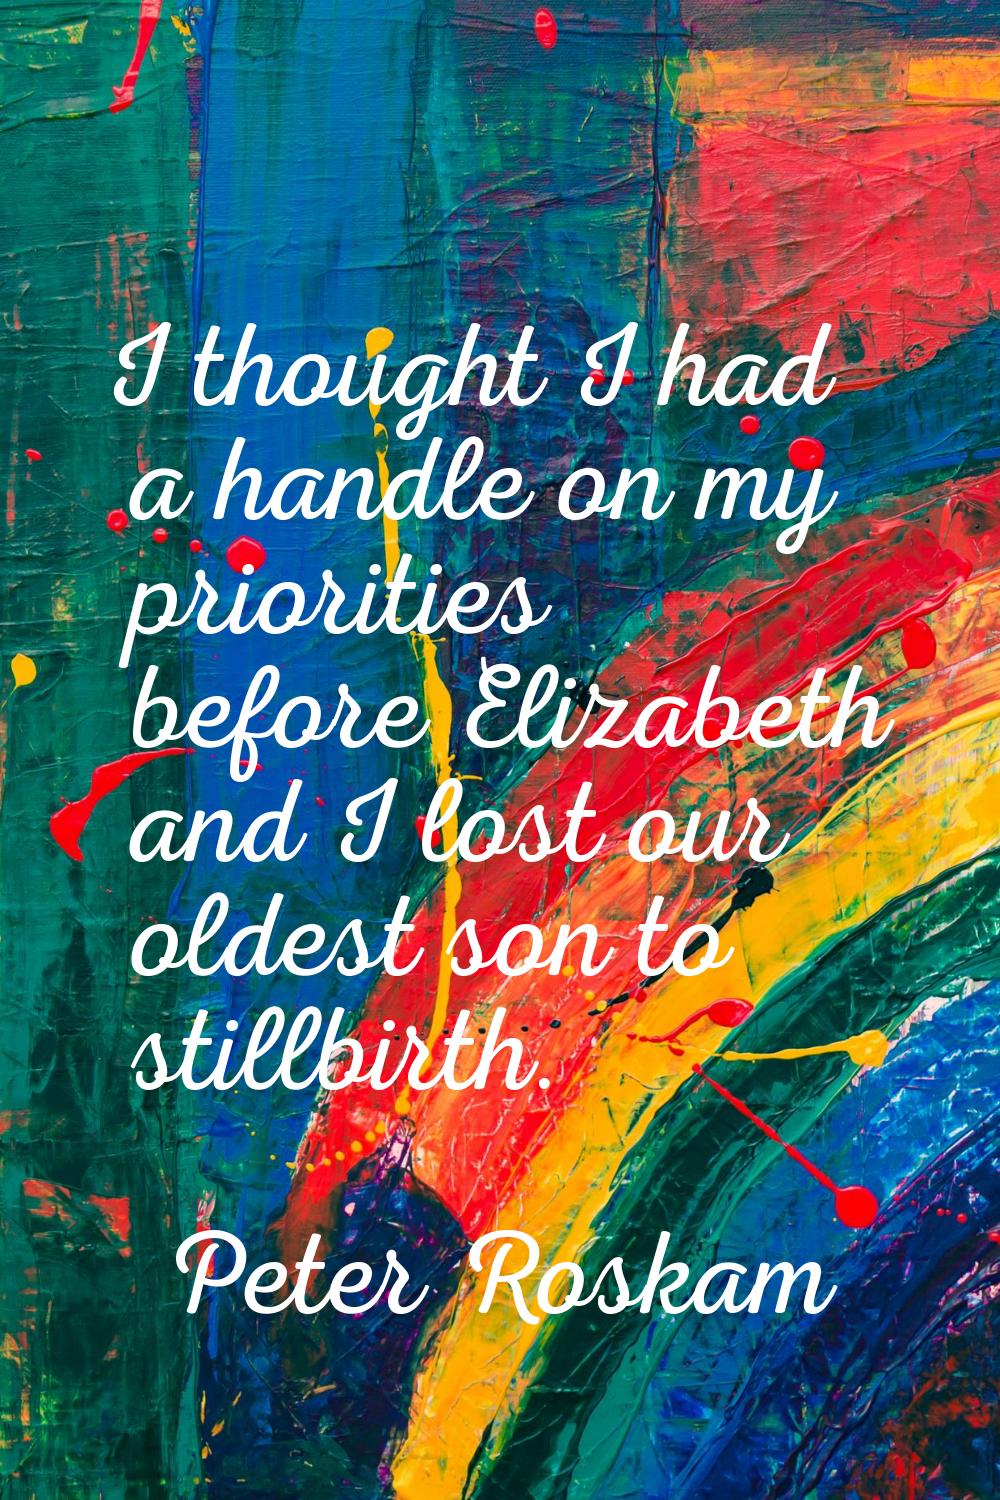 I thought I had a handle on my priorities before Elizabeth and I lost our oldest son to stillbirth.